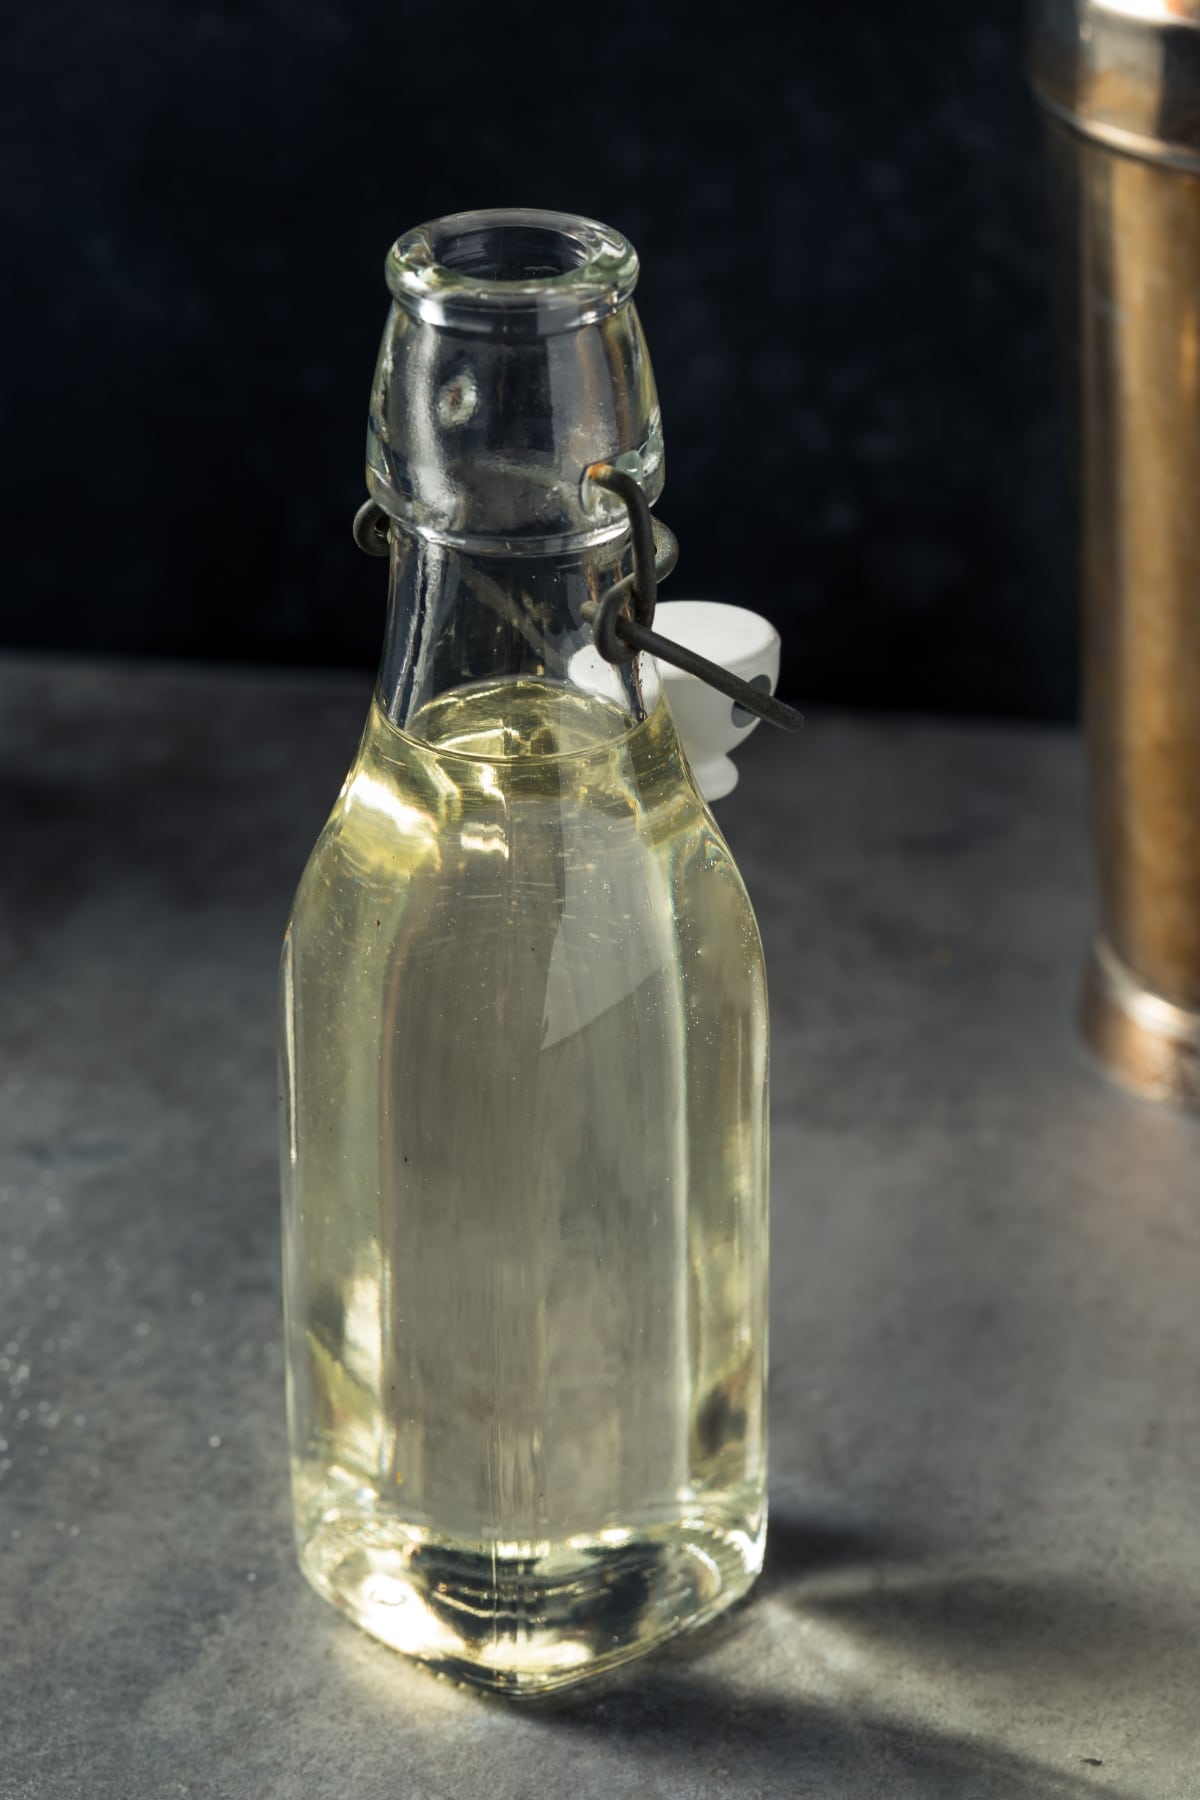 Glass bottle with simple syrup on a concrete table.